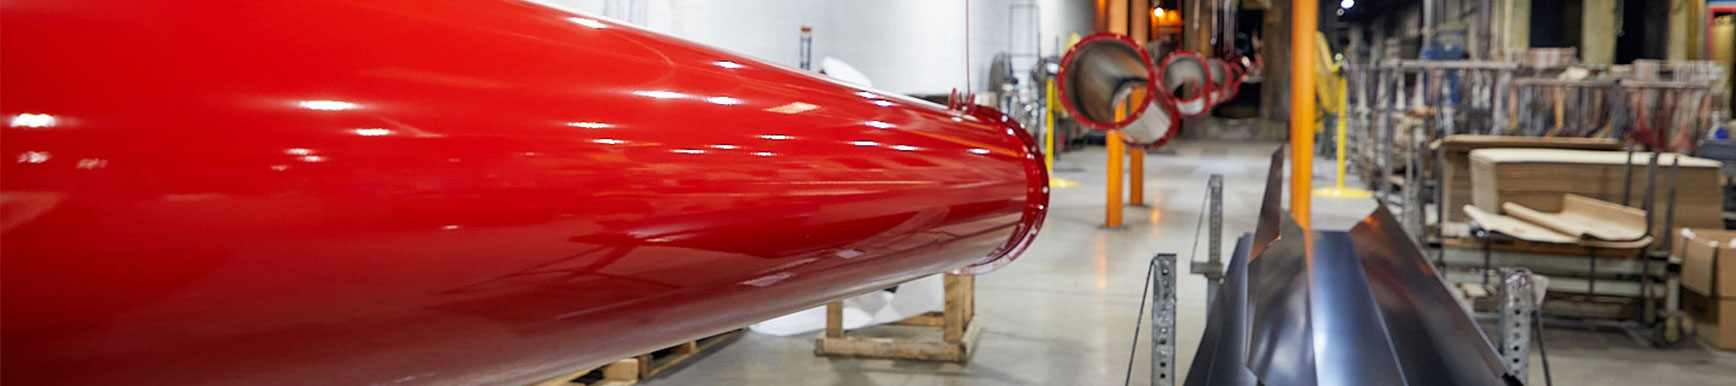 Red Powder Coated Tube Showing Color Options for Painting Jensen Powder Finishers Powder Coating Wisconsin